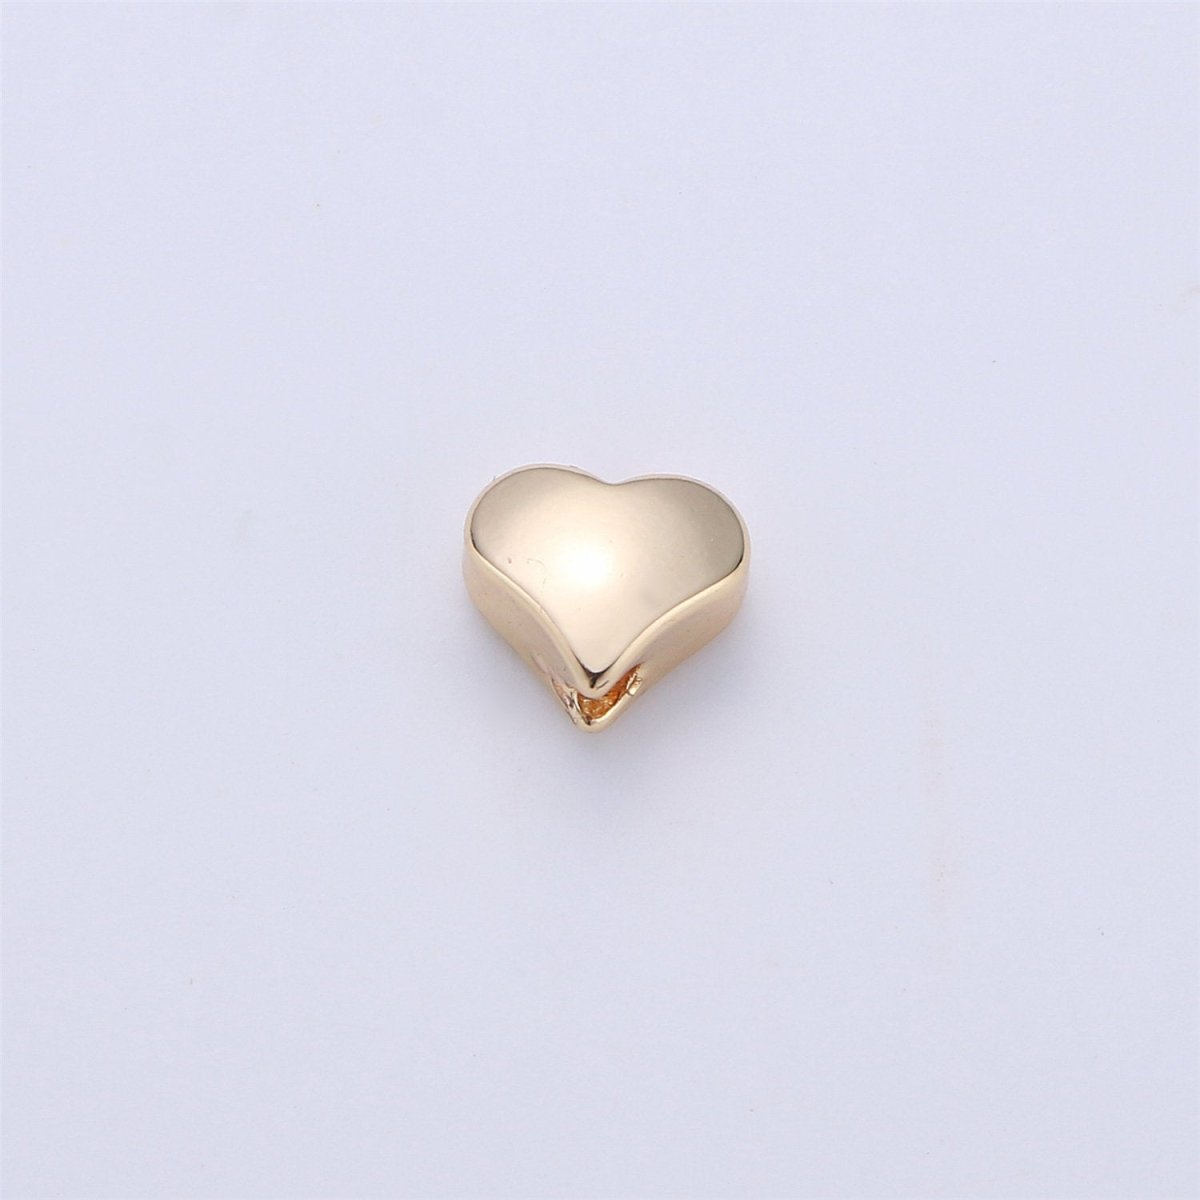 6mm Dainty Heart Bead Charm for Bracelet Necklace Charm in 14k gold filled, B-226 - DLUXCA